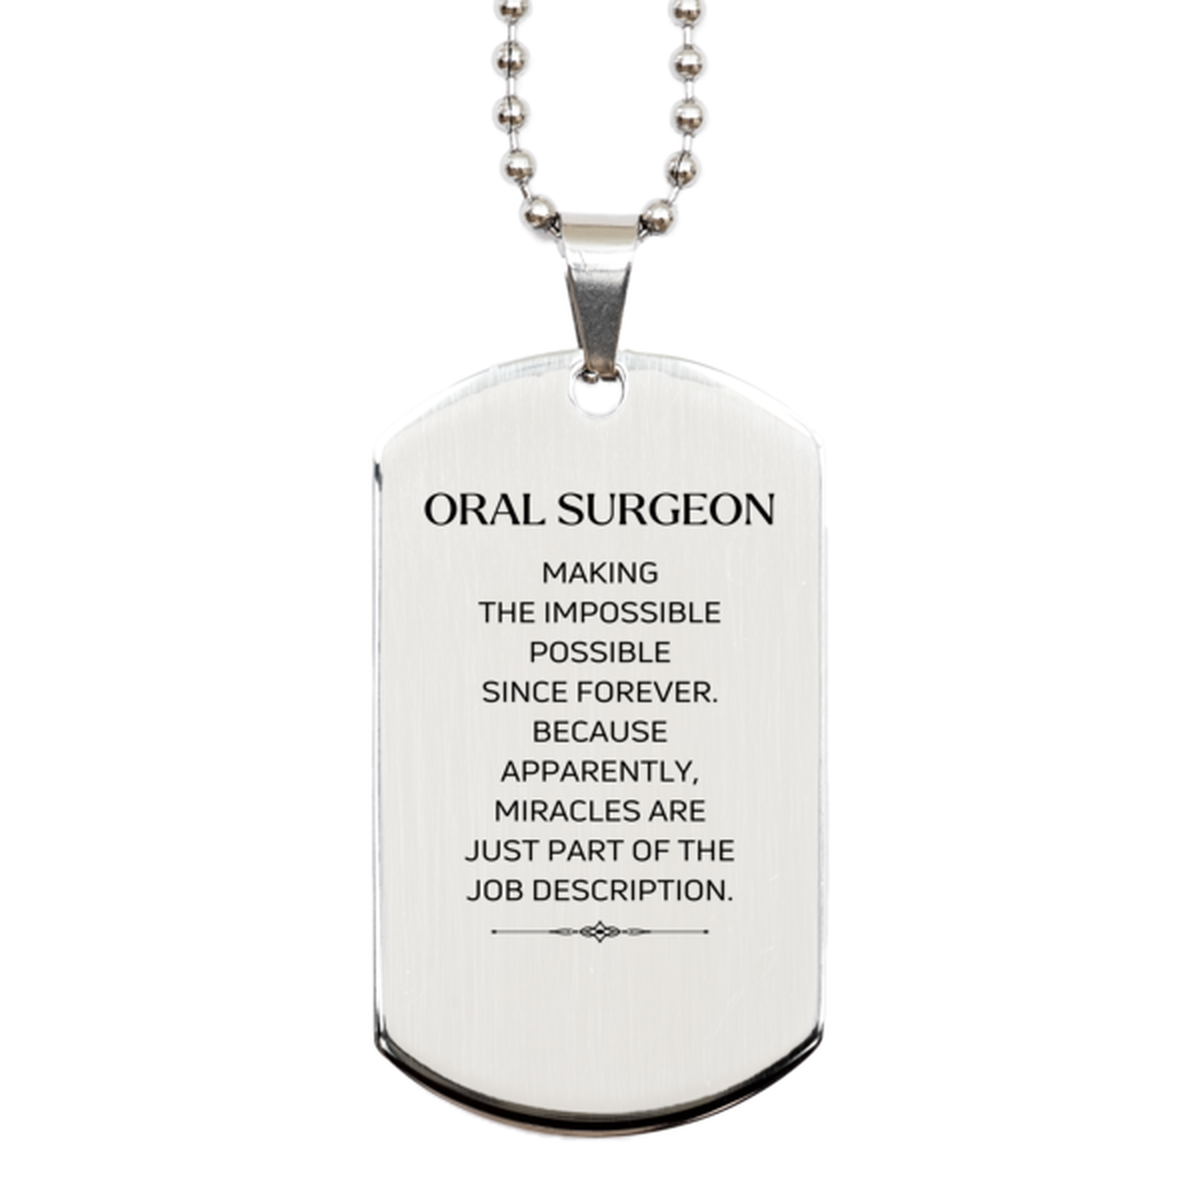 Funny Oral Surgeon Gifts, Miracles are just part of the job description, Inspirational Birthday Silver Dog Tag For Oral Surgeon, Men, Women, Coworkers, Friends, Boss